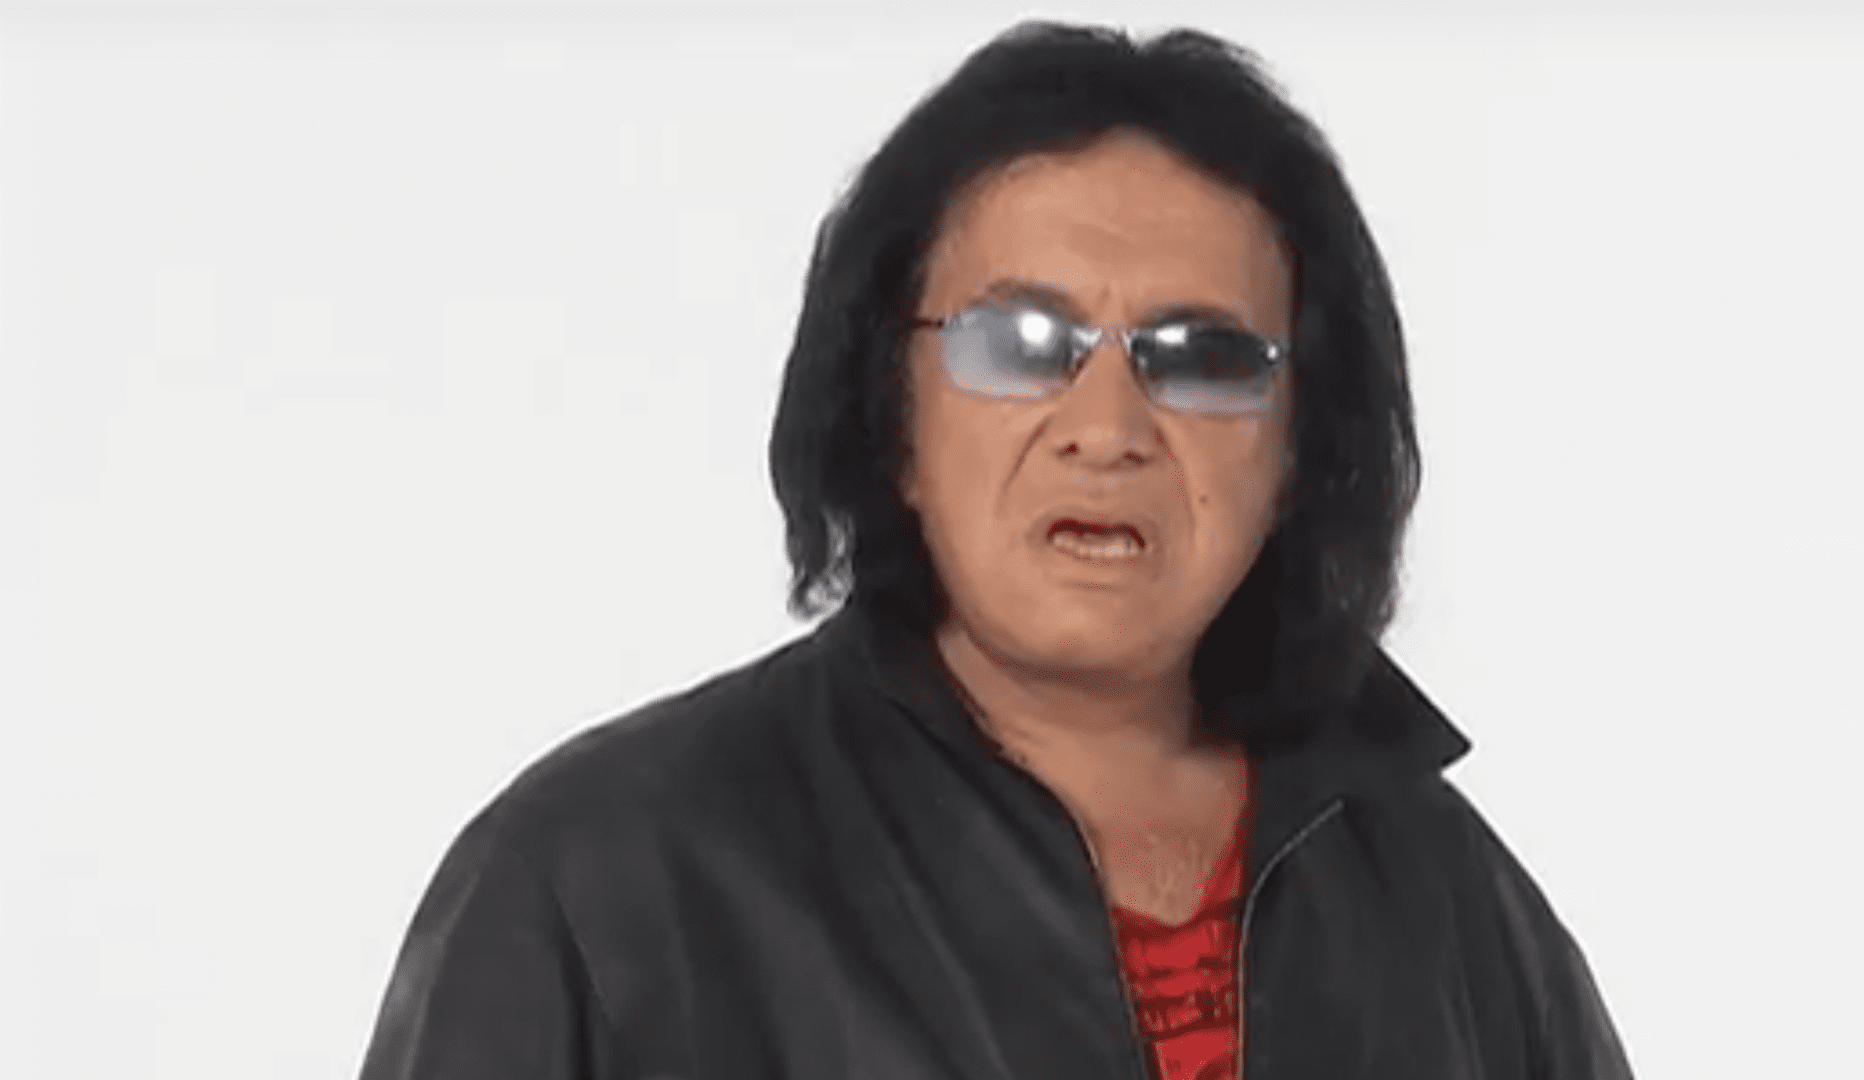 A man with long hair wearing sunglasses and a leather jacket.